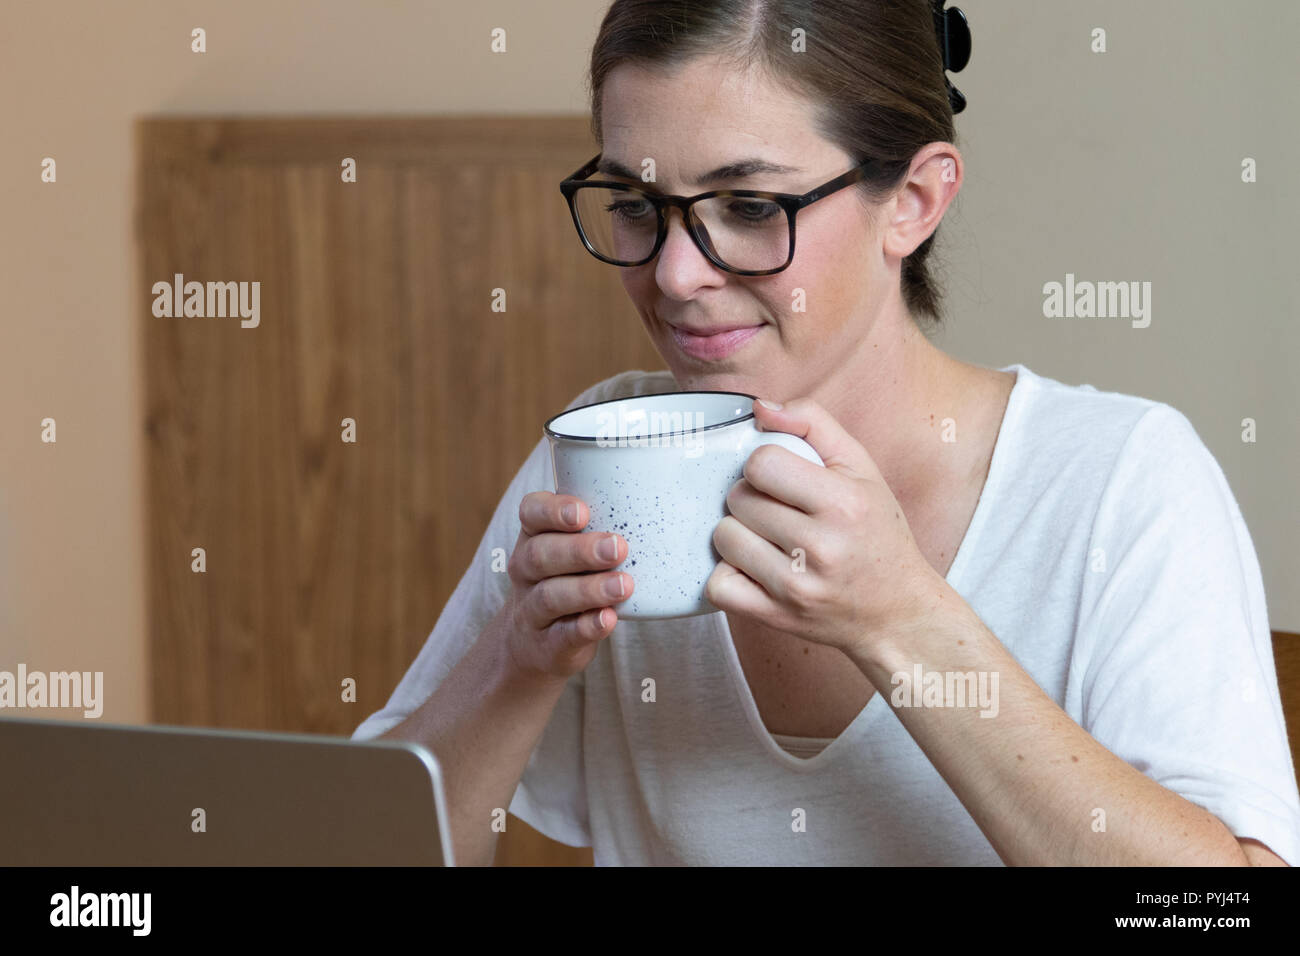 Young woman wearing glasses looking down at laptop holding a mug to take a drink. Close up of her face and hands and corner of the computer. Stock Photo